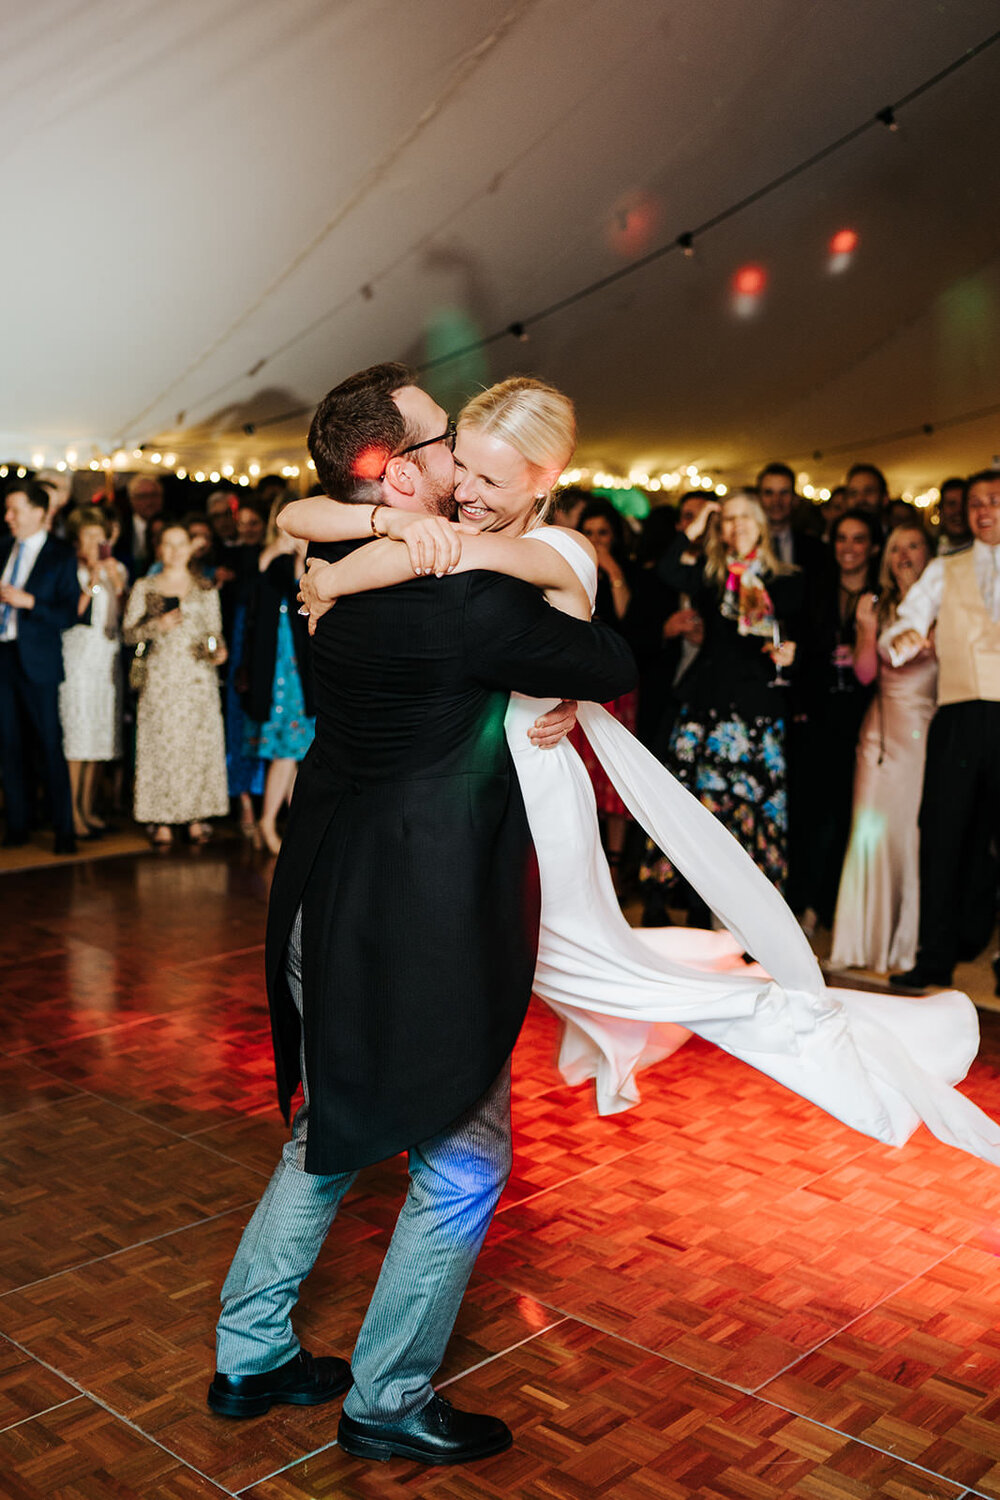 Groom lifts bride up and twirls her around during first dance in Hawarden, Wales while DJ lights go off in the background